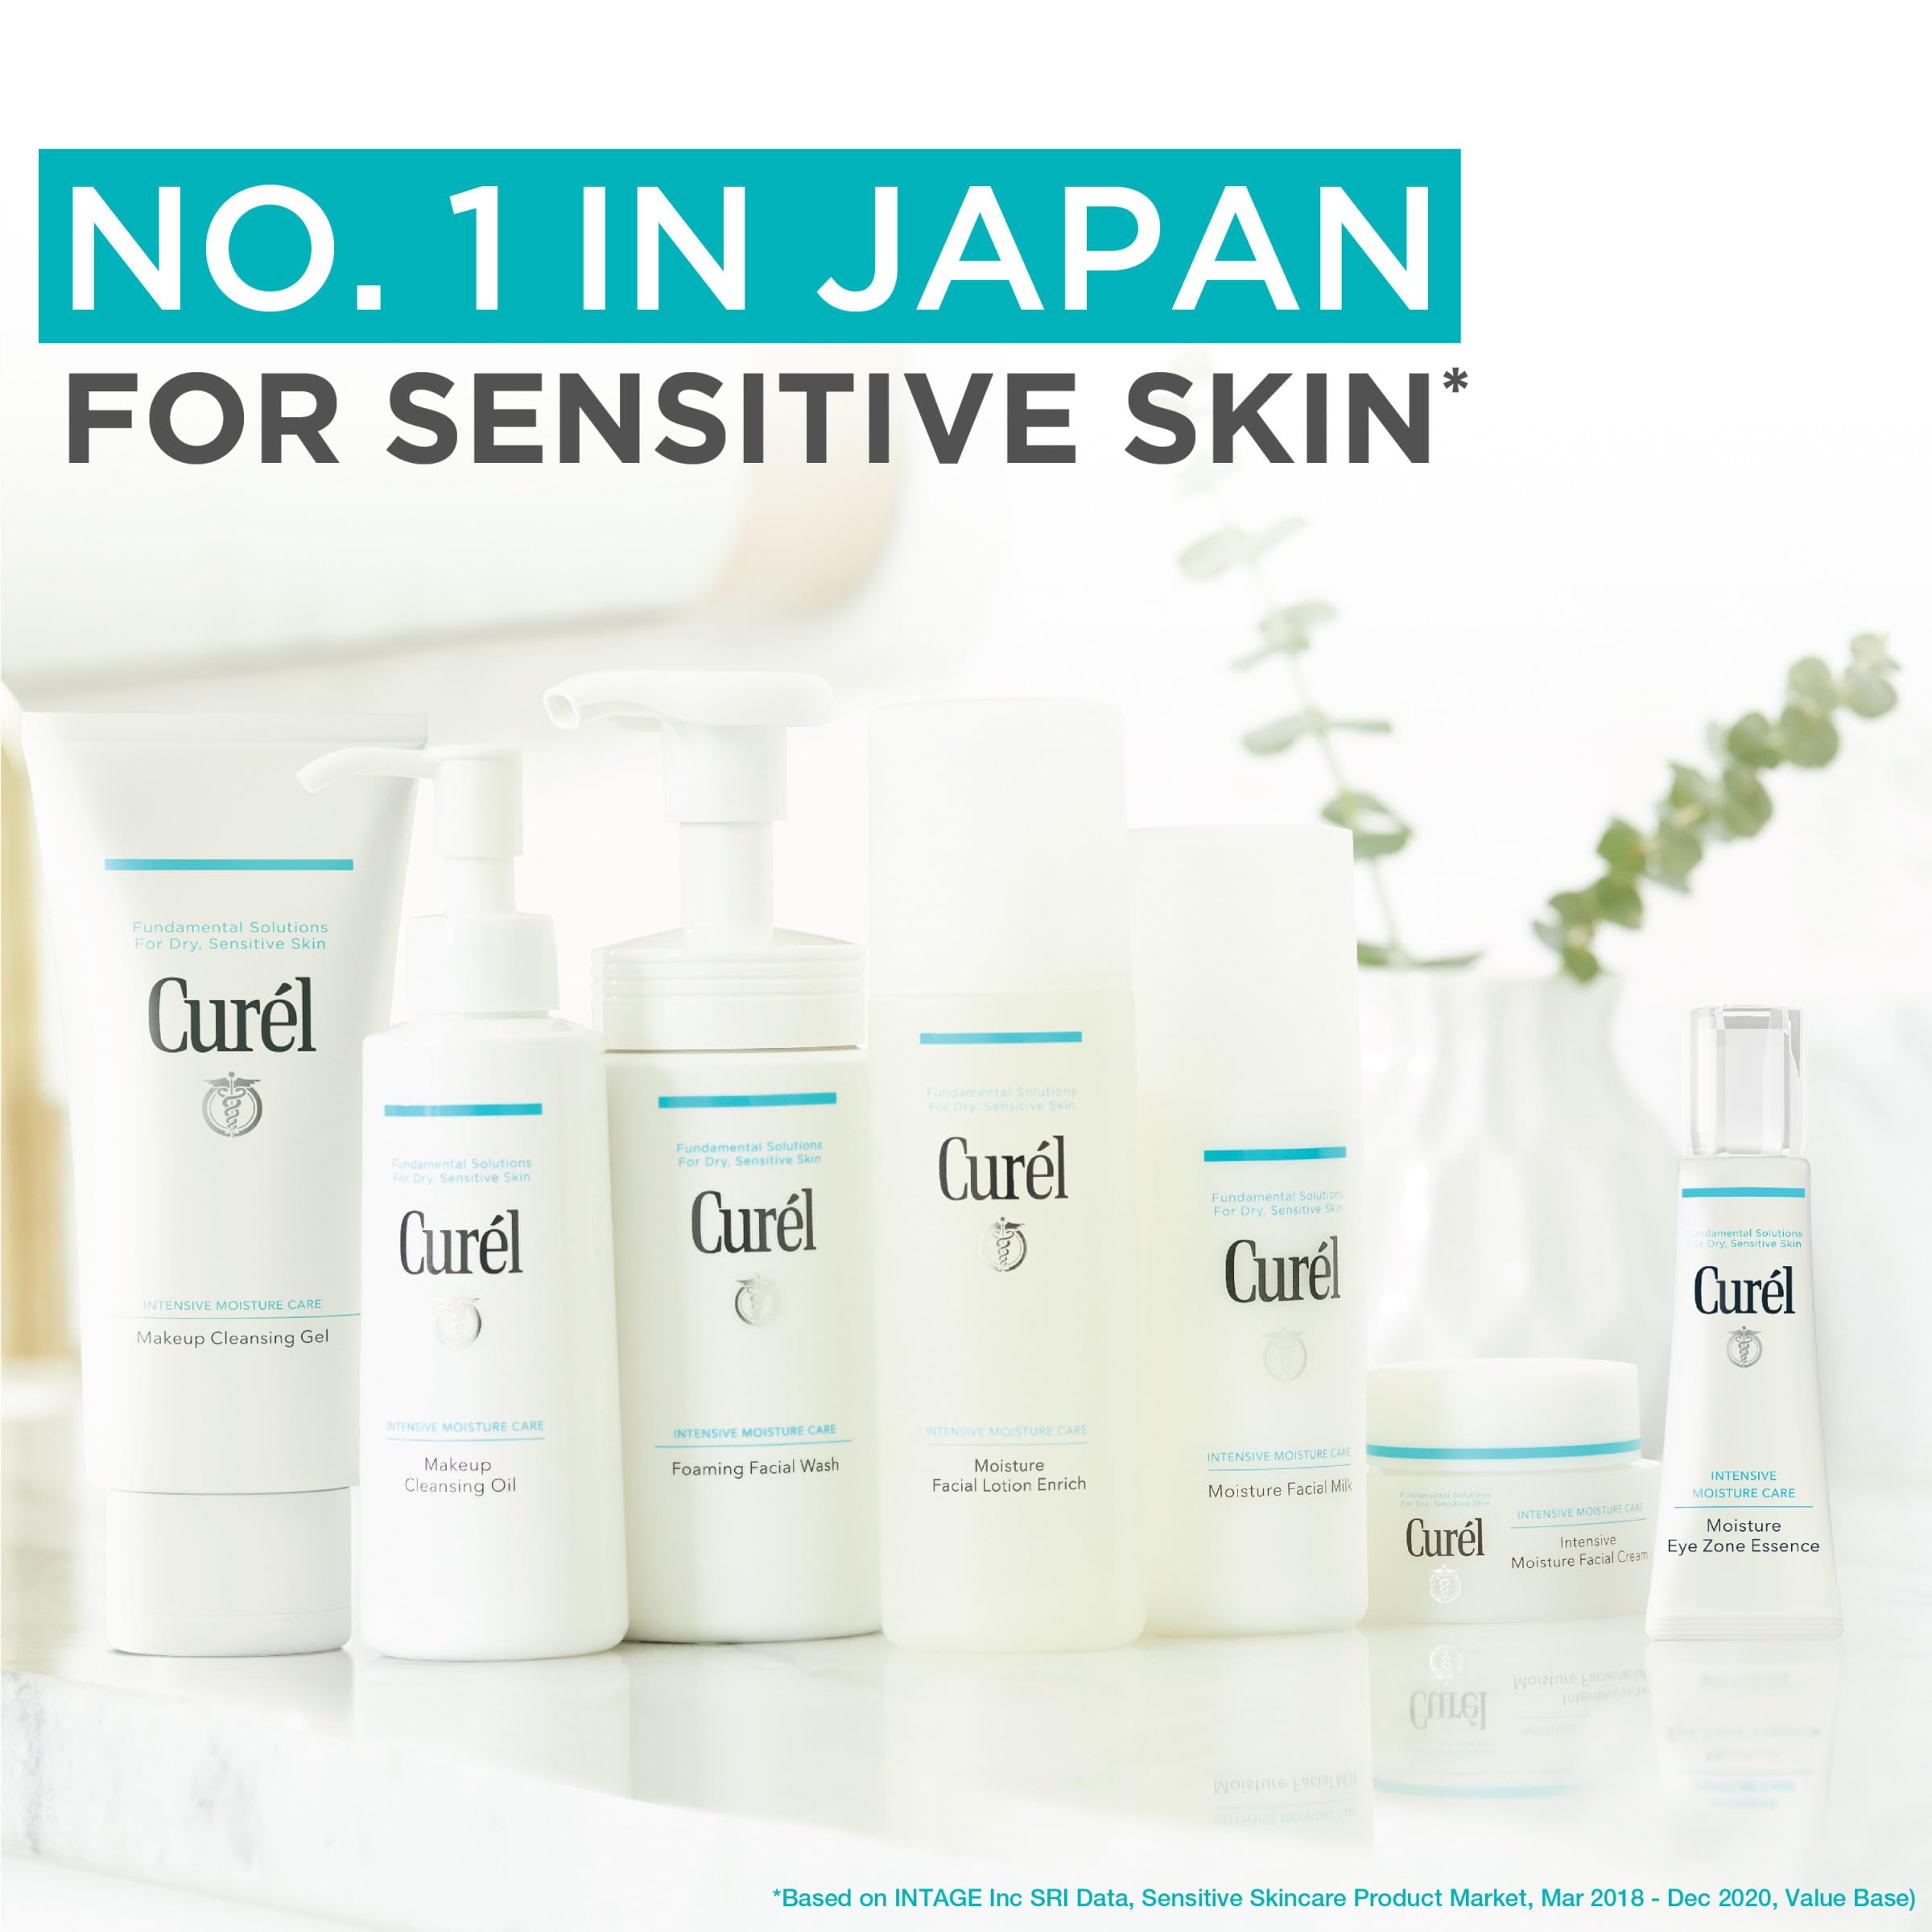 Curel Japanese Skin Care Travel Size Toiletries, for Dry, Sensitive Skin, Travel Size Face Wash, Travel Size Lotion, Travel Size Makeup Remove